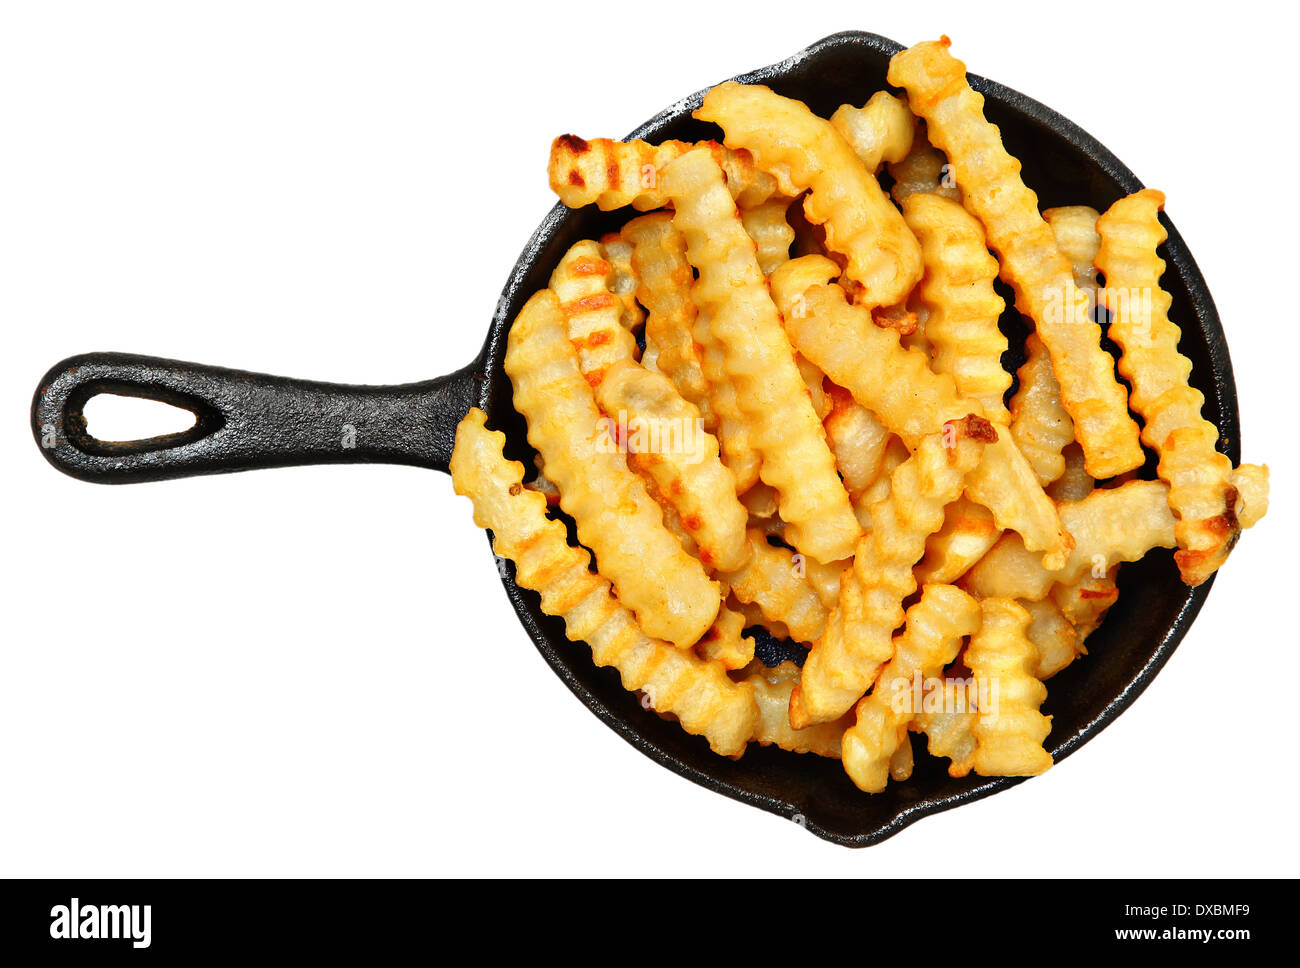 https://c8.alamy.com/comp/DXBMF9/oven-baked-crinkle-fries-in-cast-iron-skillet-over-white-DXBMF9.jpg